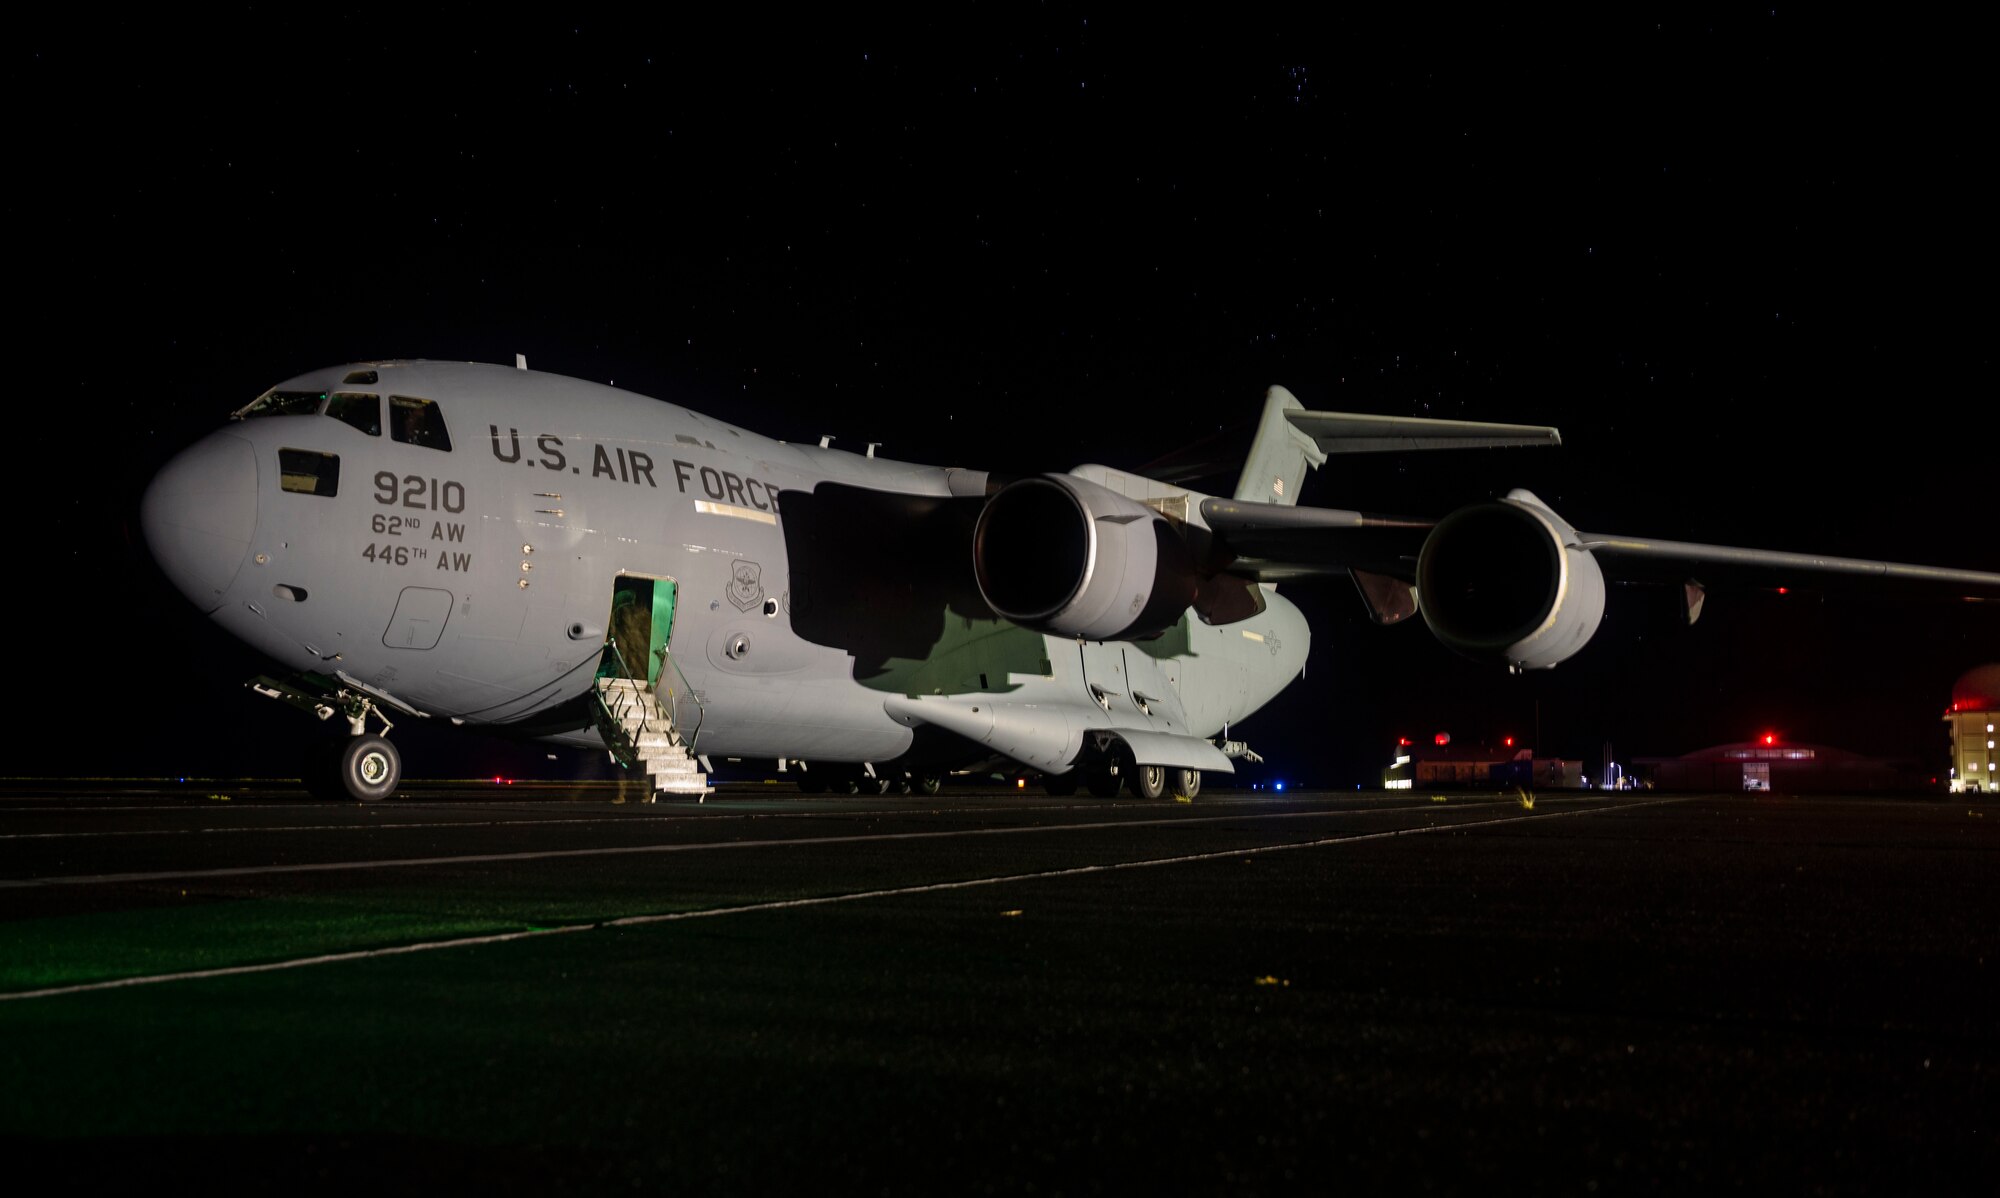 A C-17 Globemaster III, assigned to Joint Base Lewis-McChord, Washington, sits on the flightline in Iwo Jima, Japan, during Exercise Rainier War 21B, Nov. 7, 2021. Rainier War 21B exercises and evaluates the 62nd Airlift Wing’s ability to employ the force and their ability to perform during wartime and contingency taskings in a high-intensity, wartime contested, degraded and operationally limited environment while supporting the contingency operations against a near-peer adversary in the U.S. Indo-Pacific Command area of responsibility. (U.S. Air Force photo by Staff Sgt. Rachel Williams)